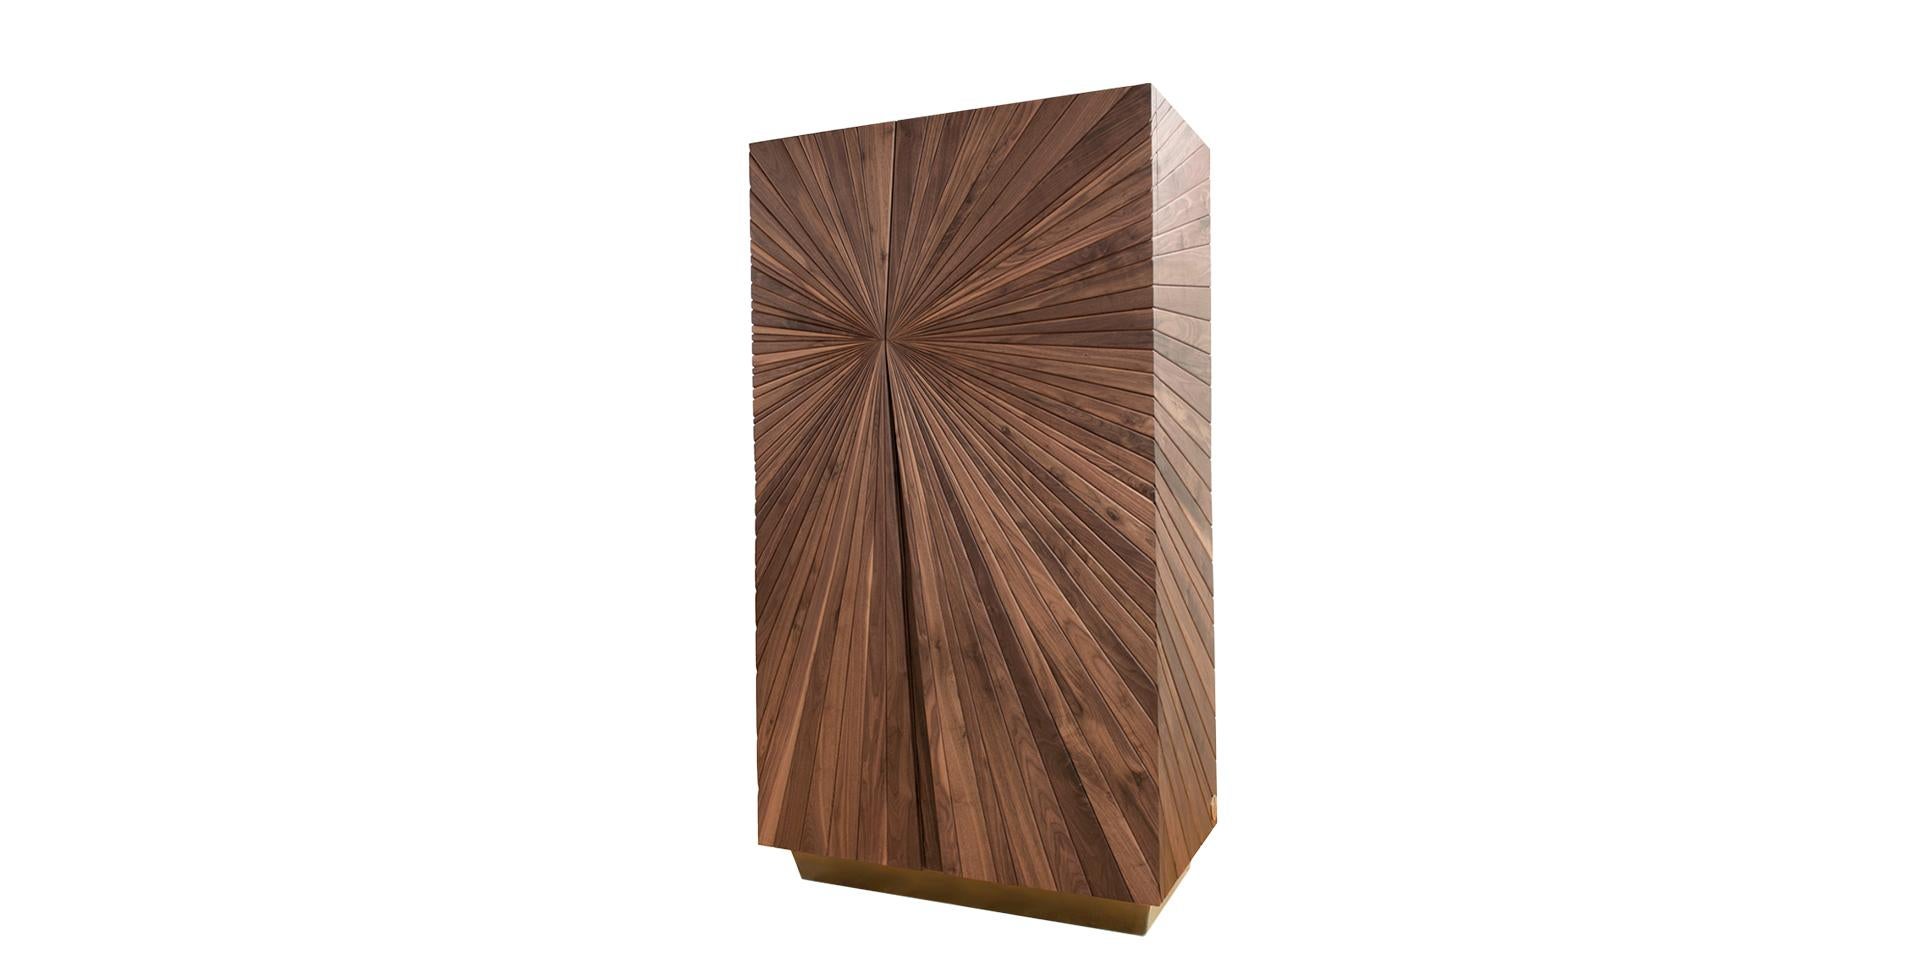 The Darvaza crater is well represented in the cabinet's details. The comtemporary piece is totally handmade, since the wood work, piece by piece application. Designers use Darvaza as a cabinet or as a bar in contemporary interiors.